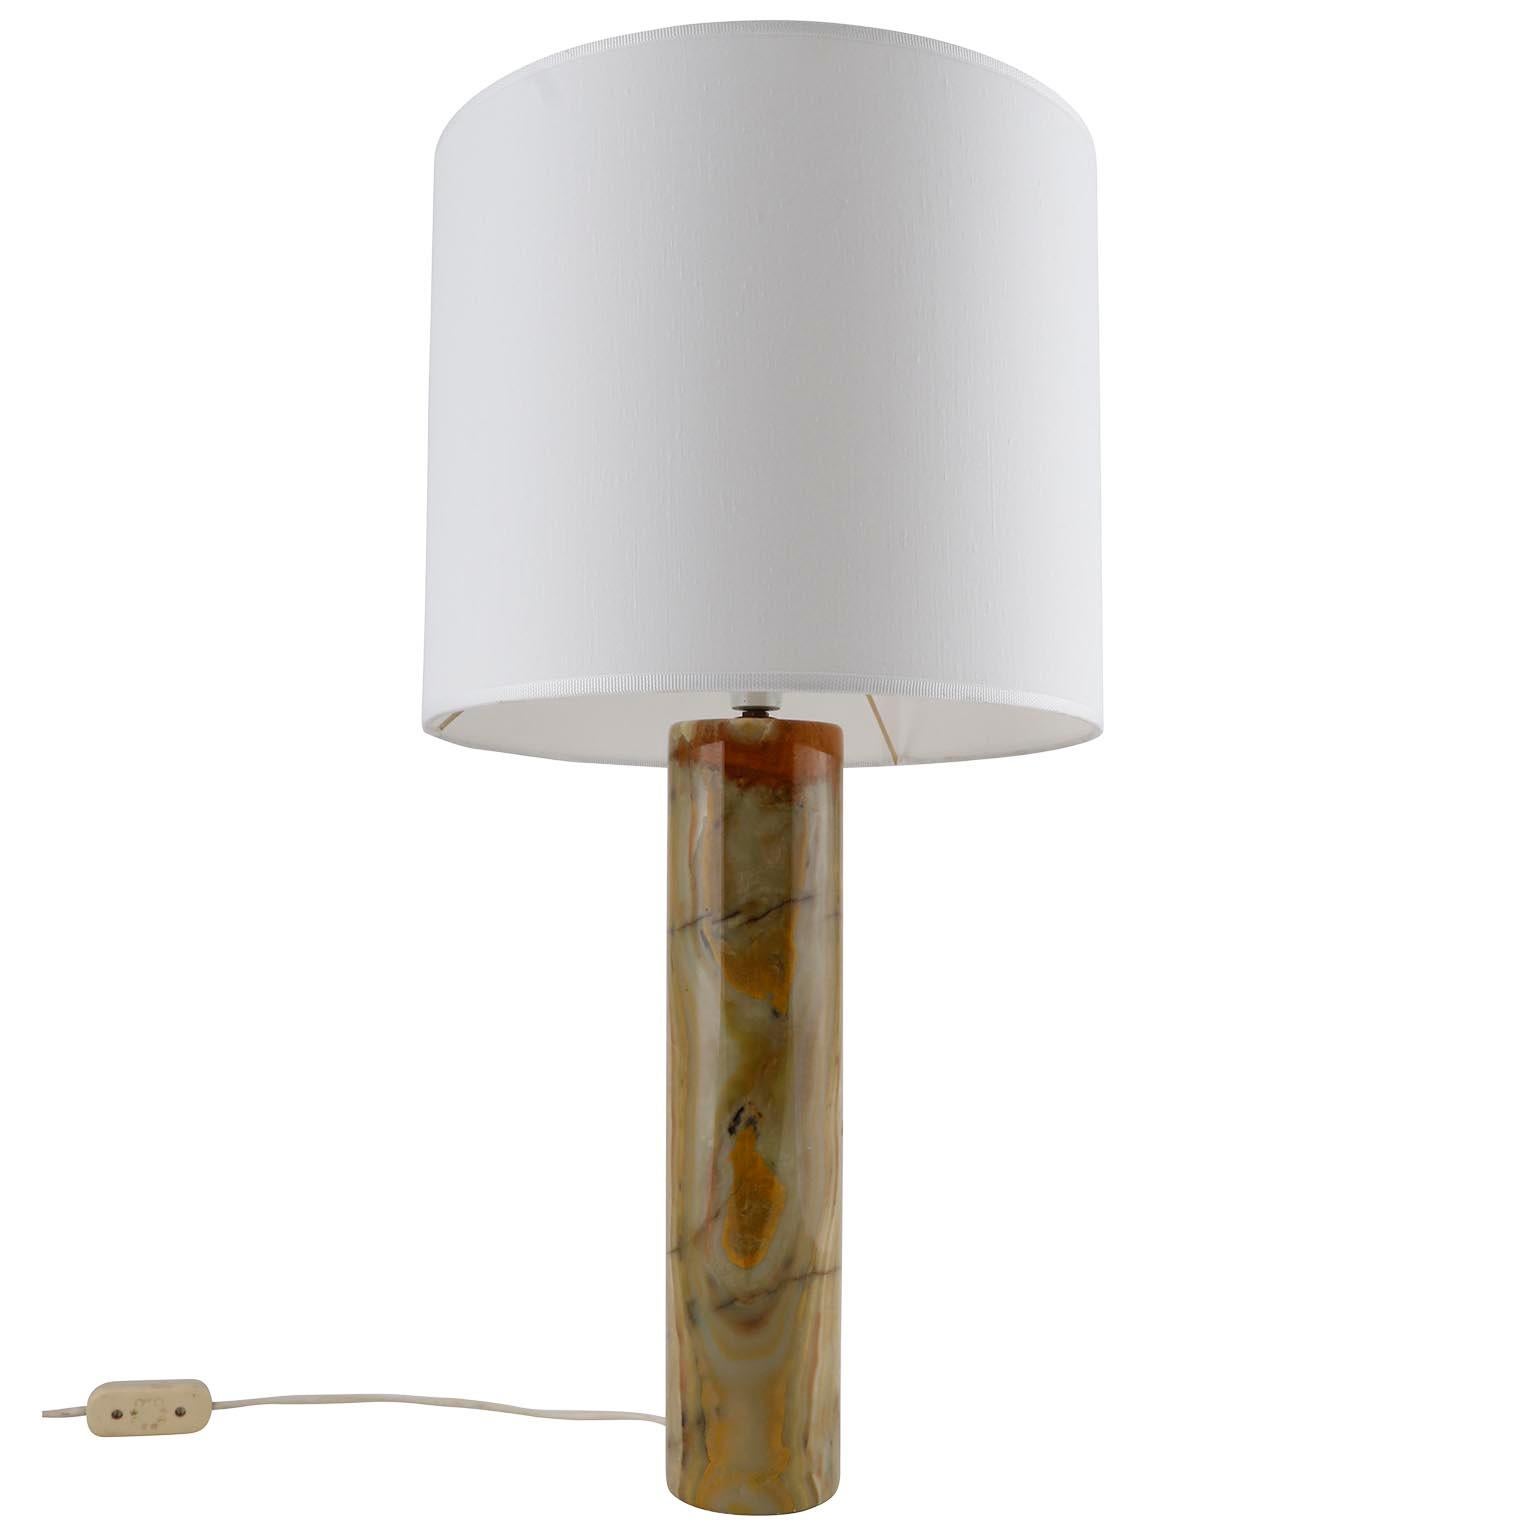 A beautiful table lamp made of green and brown marble made in Italy in 1970s.
The height including lamp shade is 27.5 inch / 70 cm and without lamp shade 18.5 inch / 47 cm.
The natural white lamp shade has been renewed.
Dimensions:
With